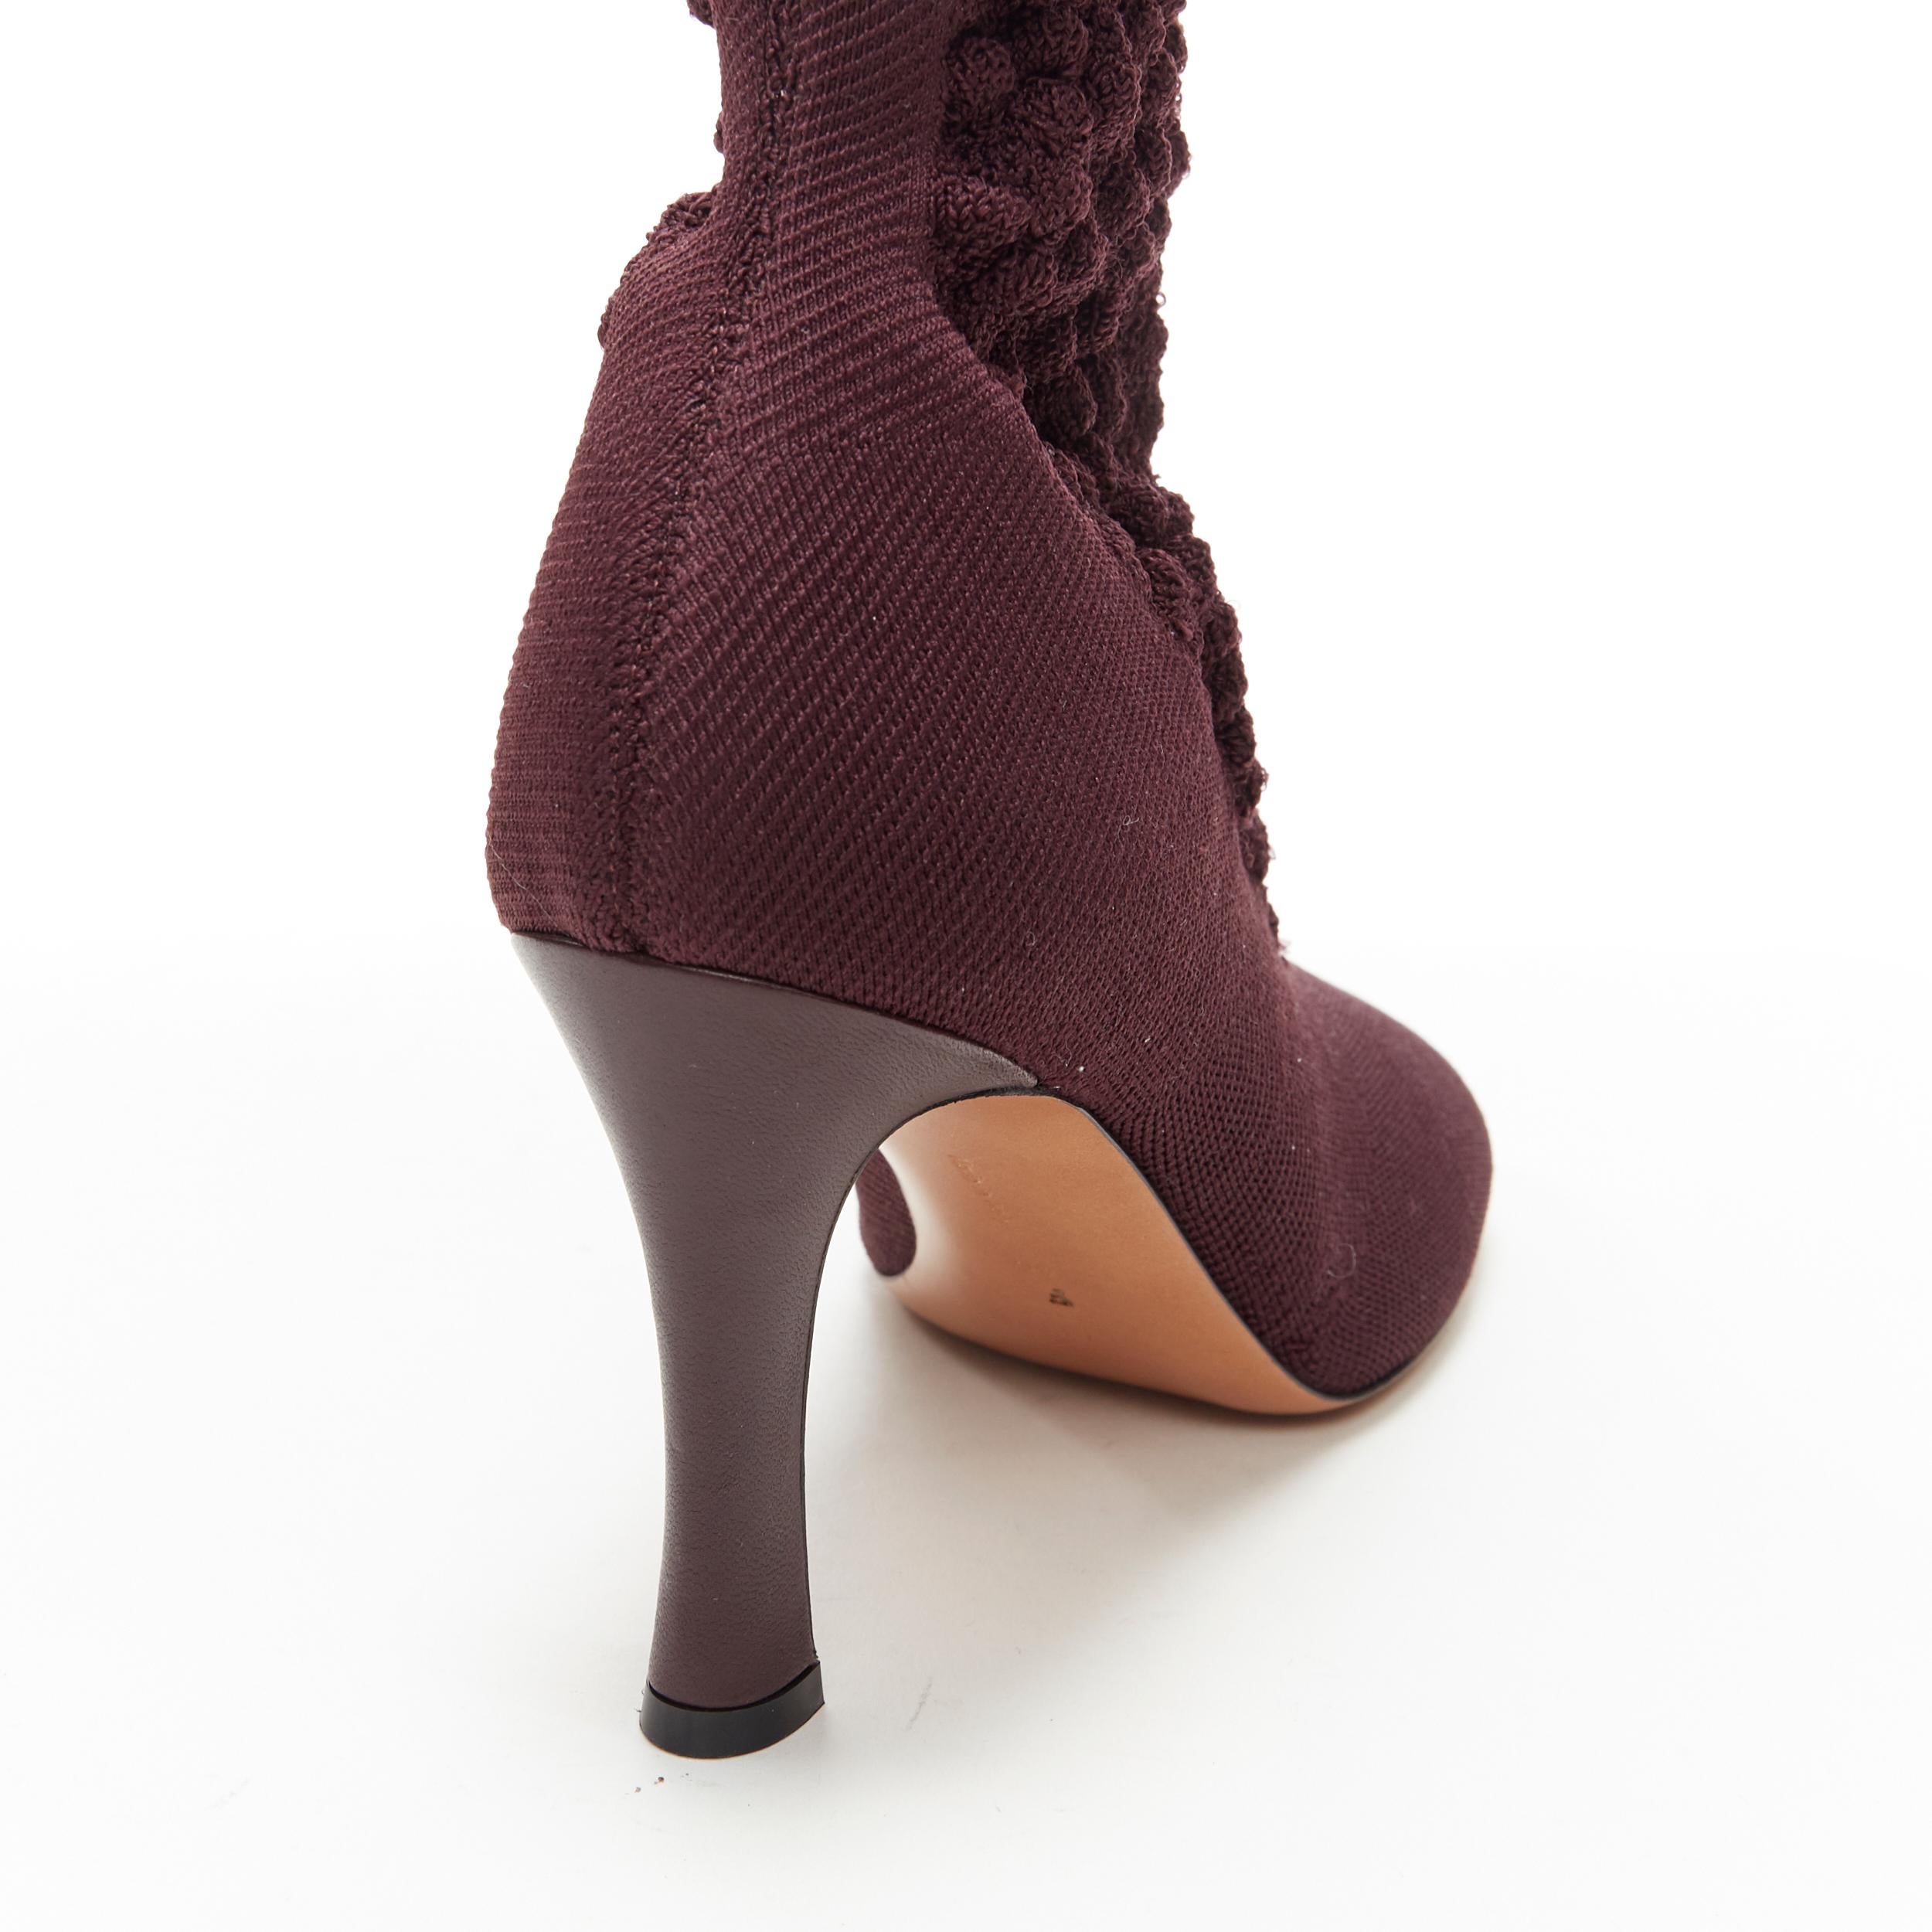 new OLD CELINE Glove Bootie burgundy textured sock knit square toe boots EU40 1